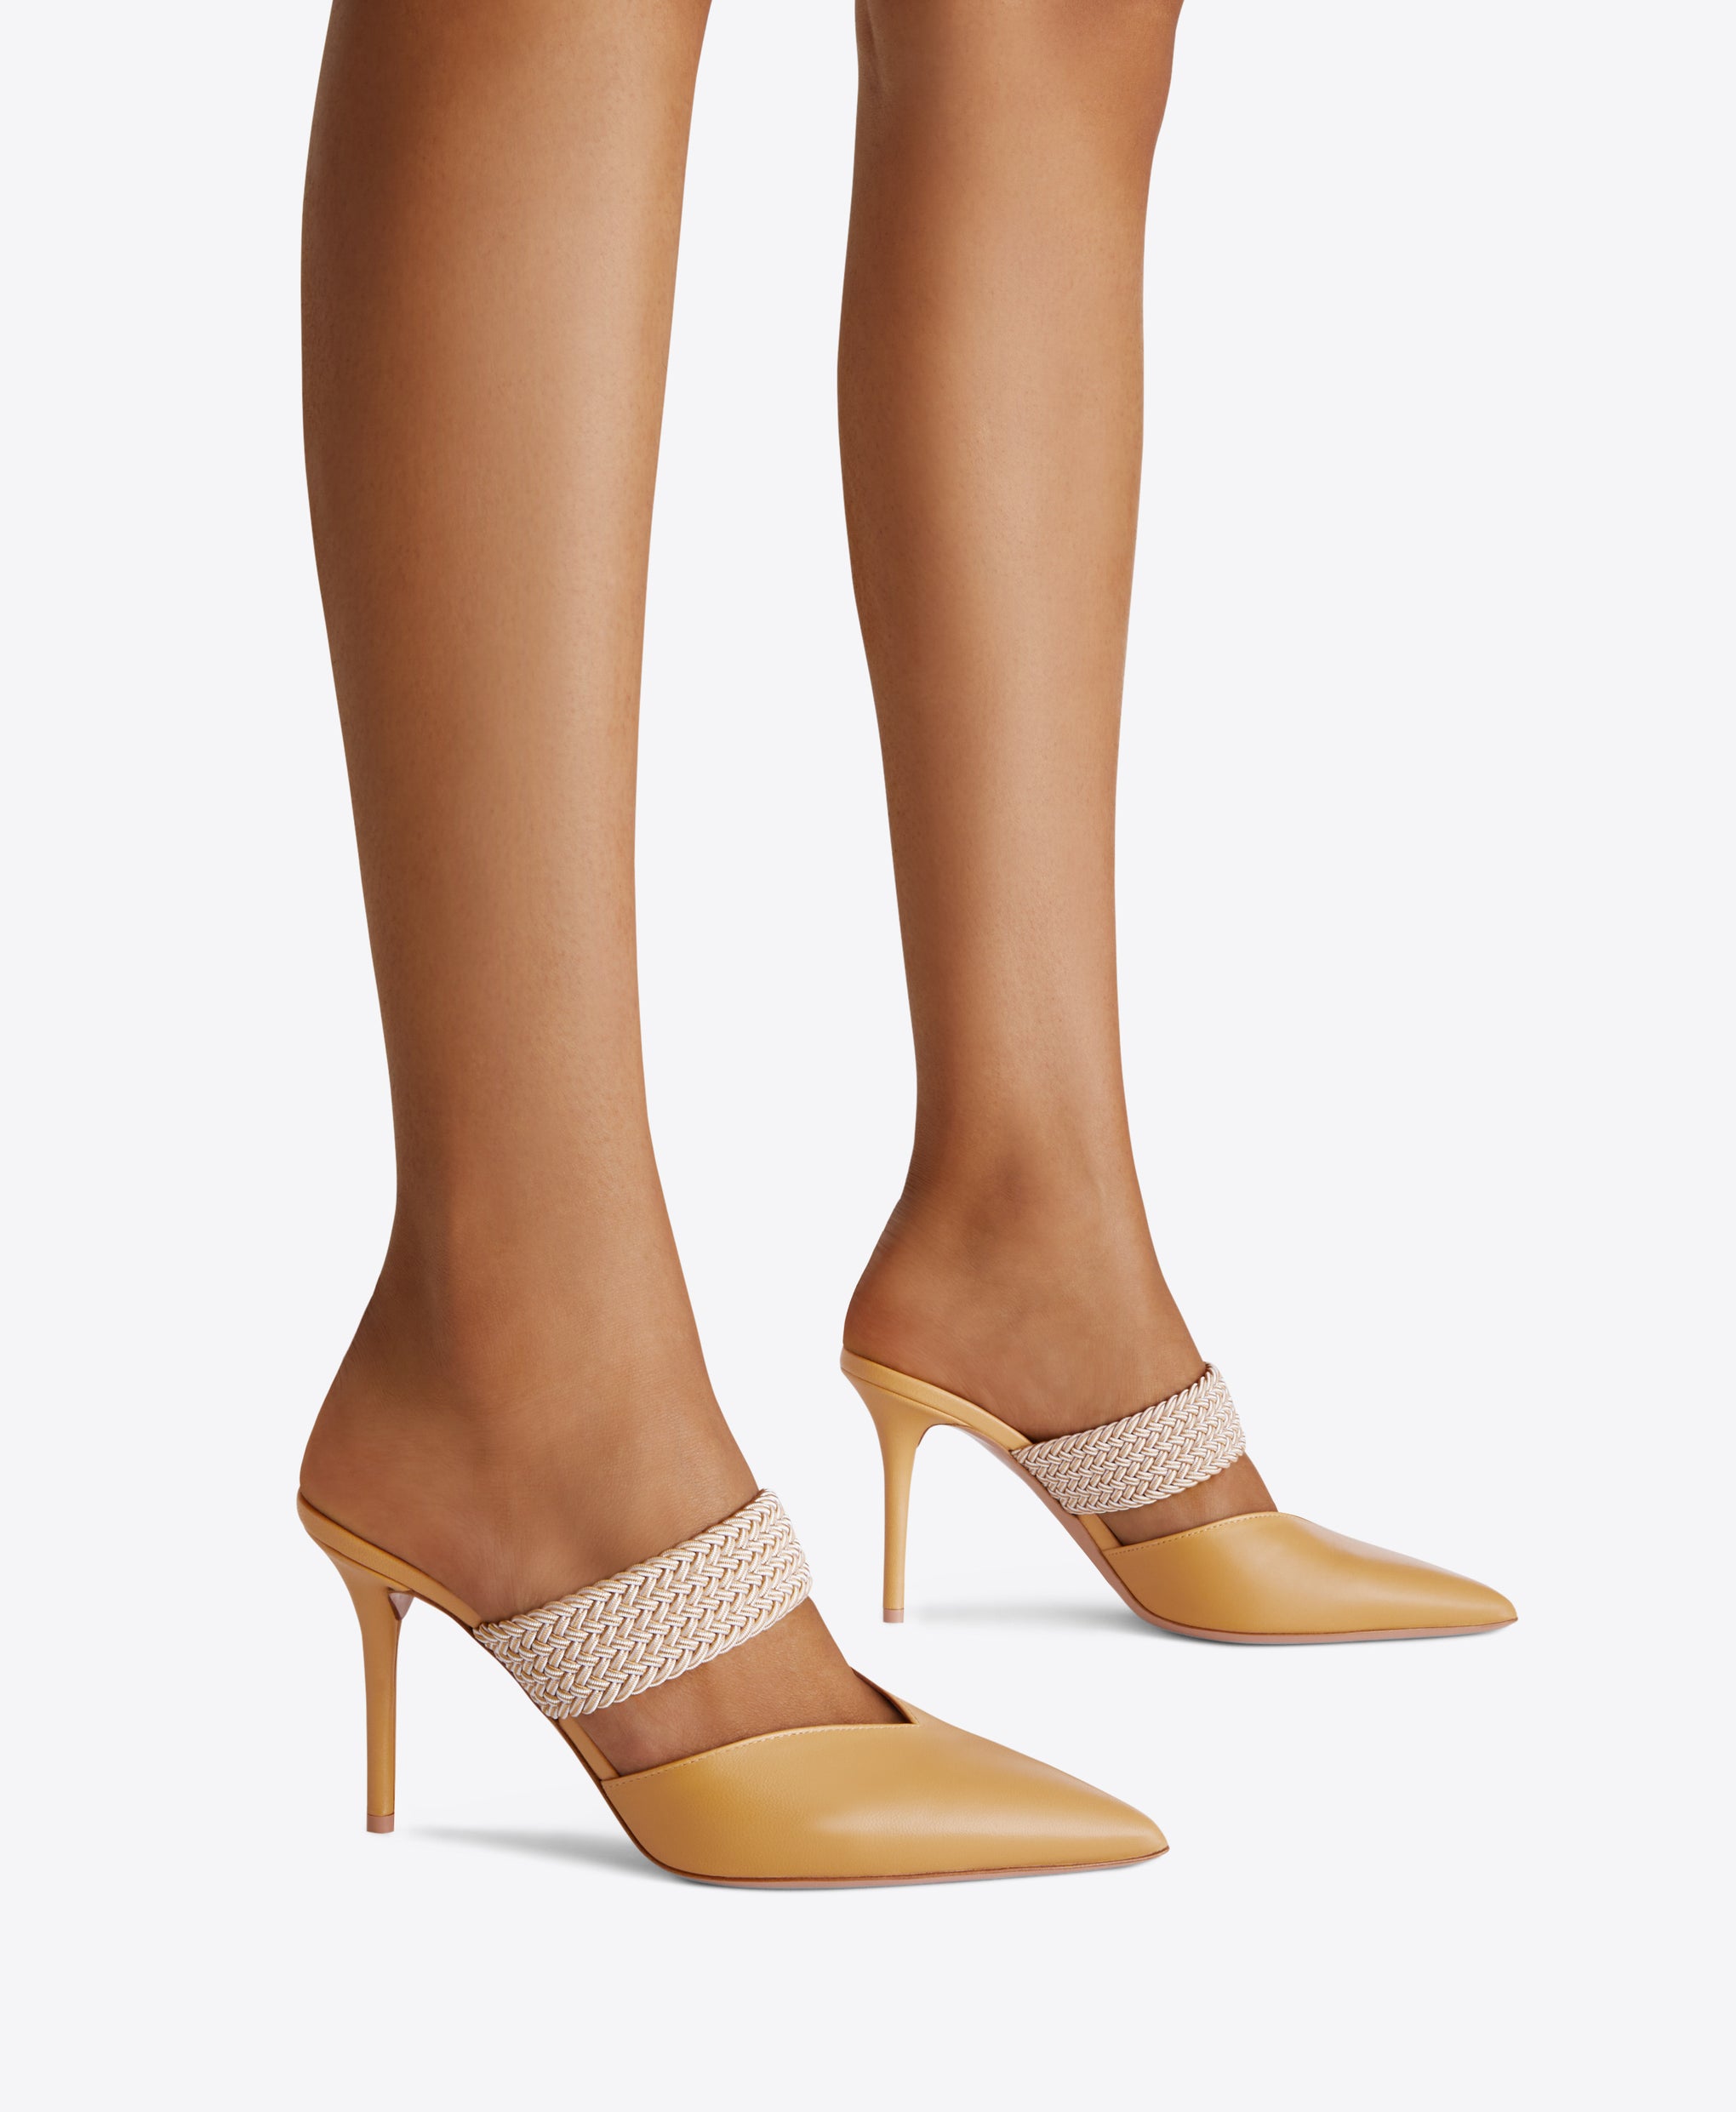 Malone Souliers Maisie 85mm Sepia Leather Heeled Mules